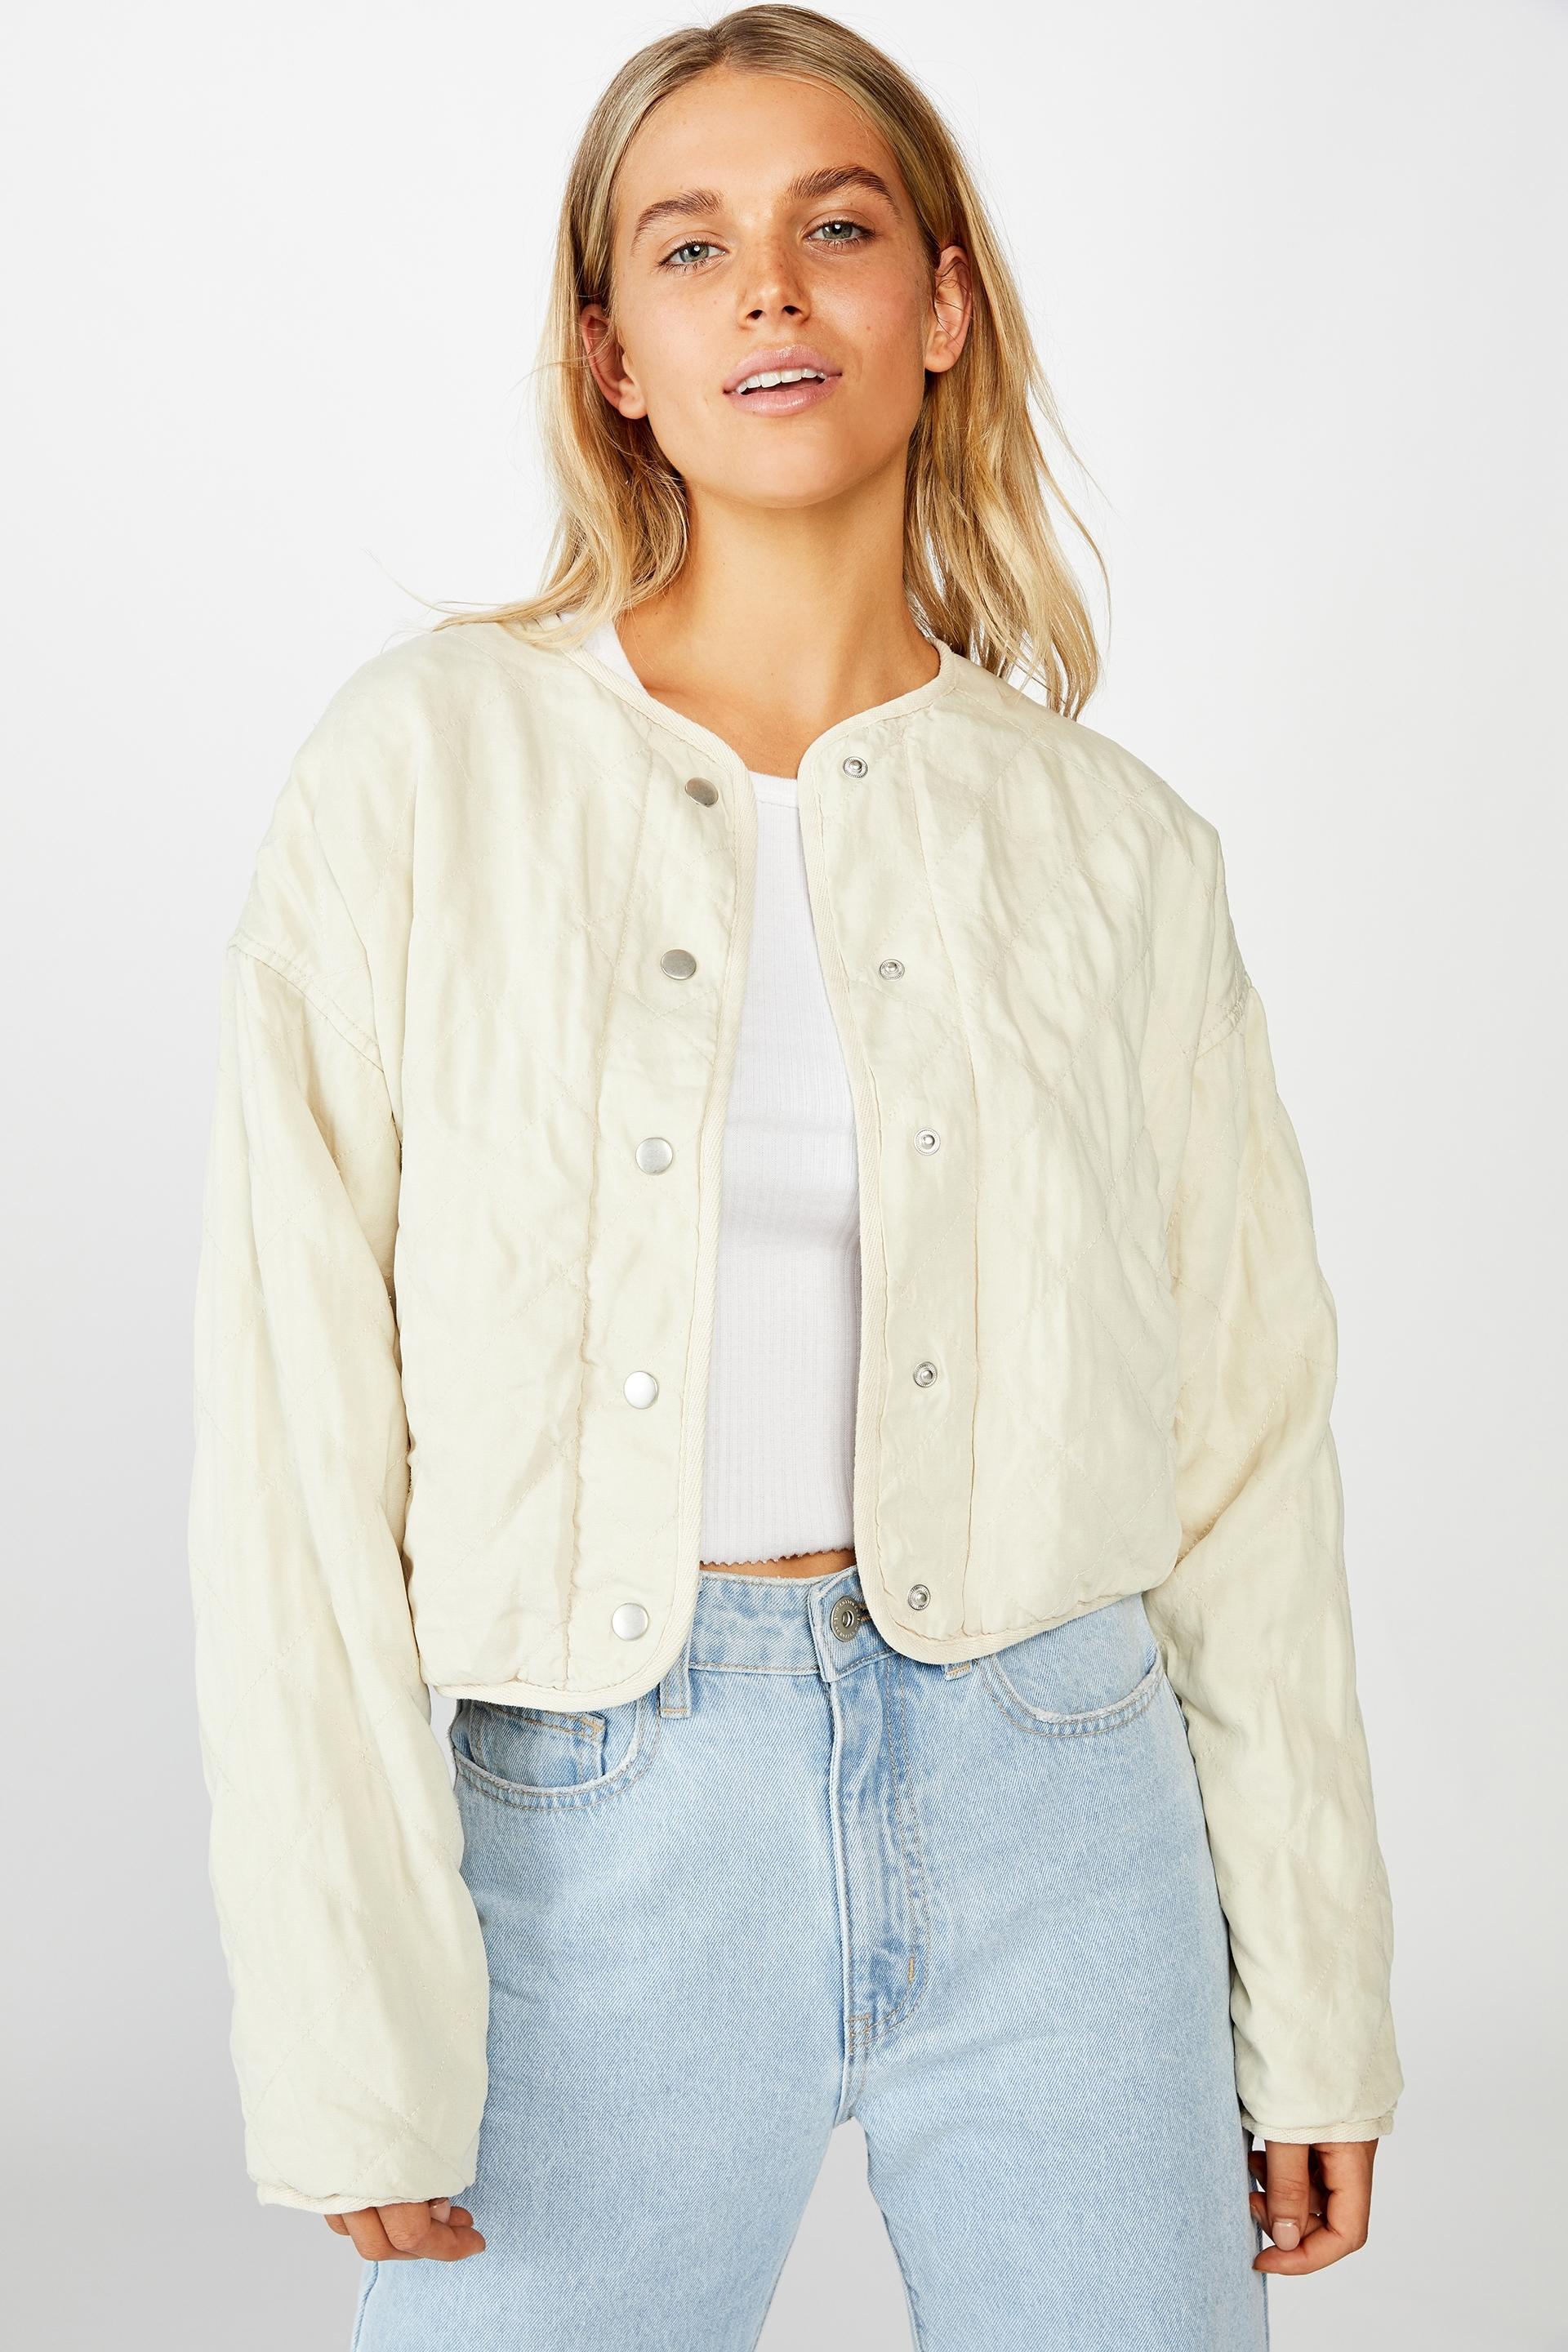 Cropped quilted bomber - moonbeam Cotton On Jackets | Superbalist.com